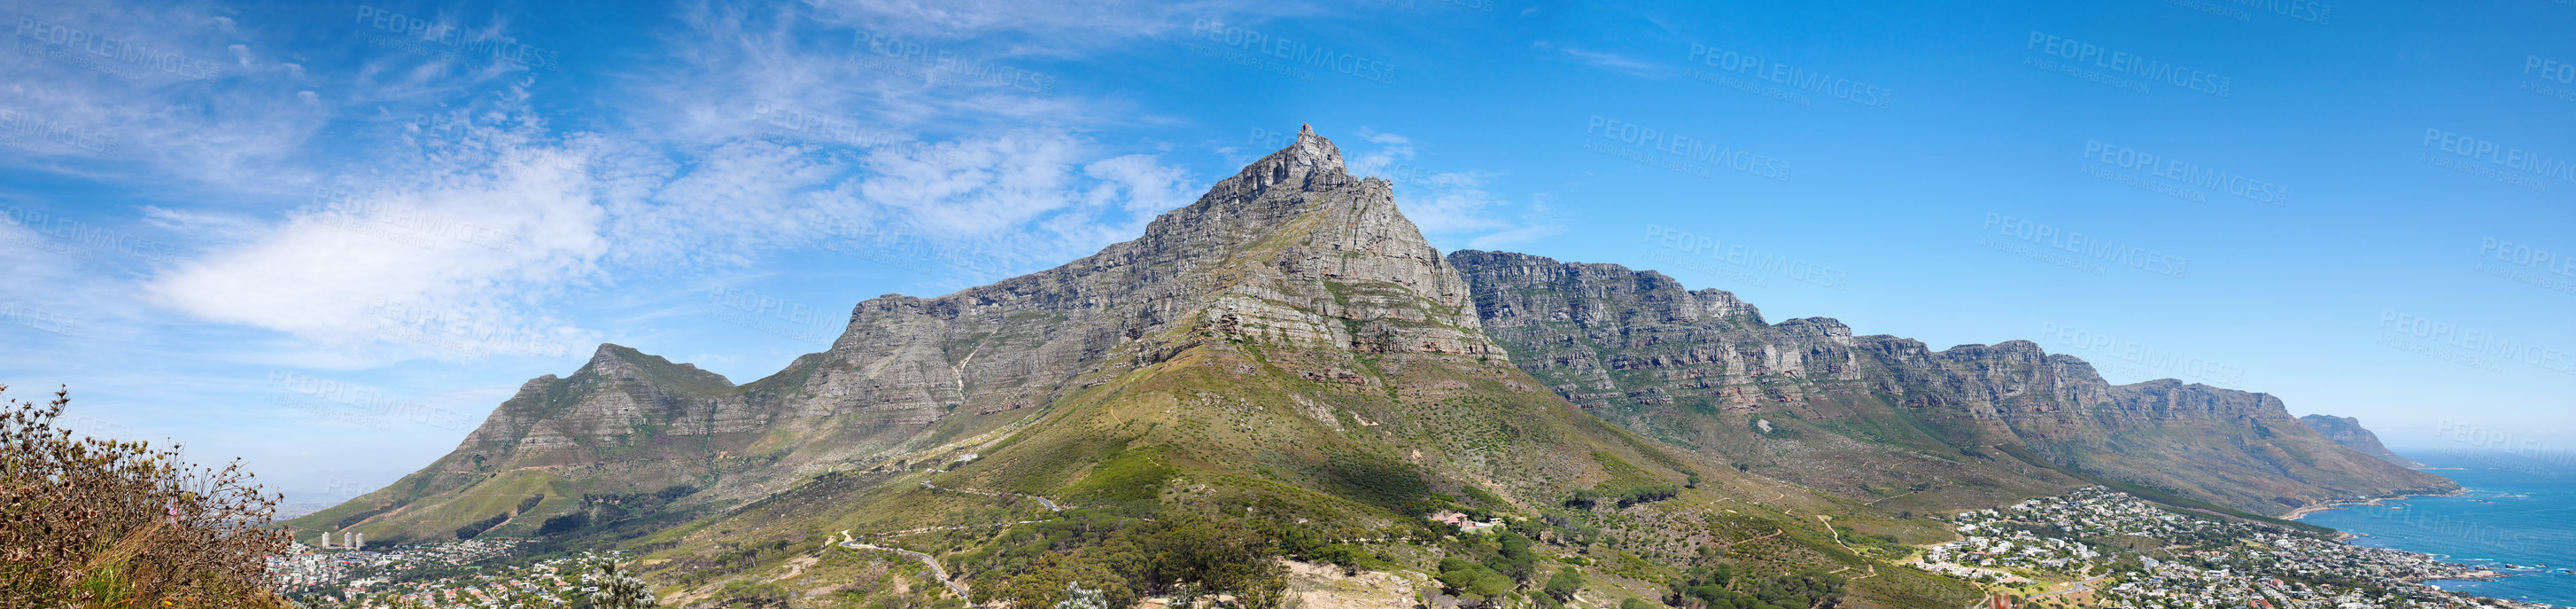 Buy stock photo Landscape of a mountain against a blue sky with copyspace. A popular travel destination for tourists and hikers to explore. View of Table Mountain and the twelve apostles in Cape Town, Western Cape